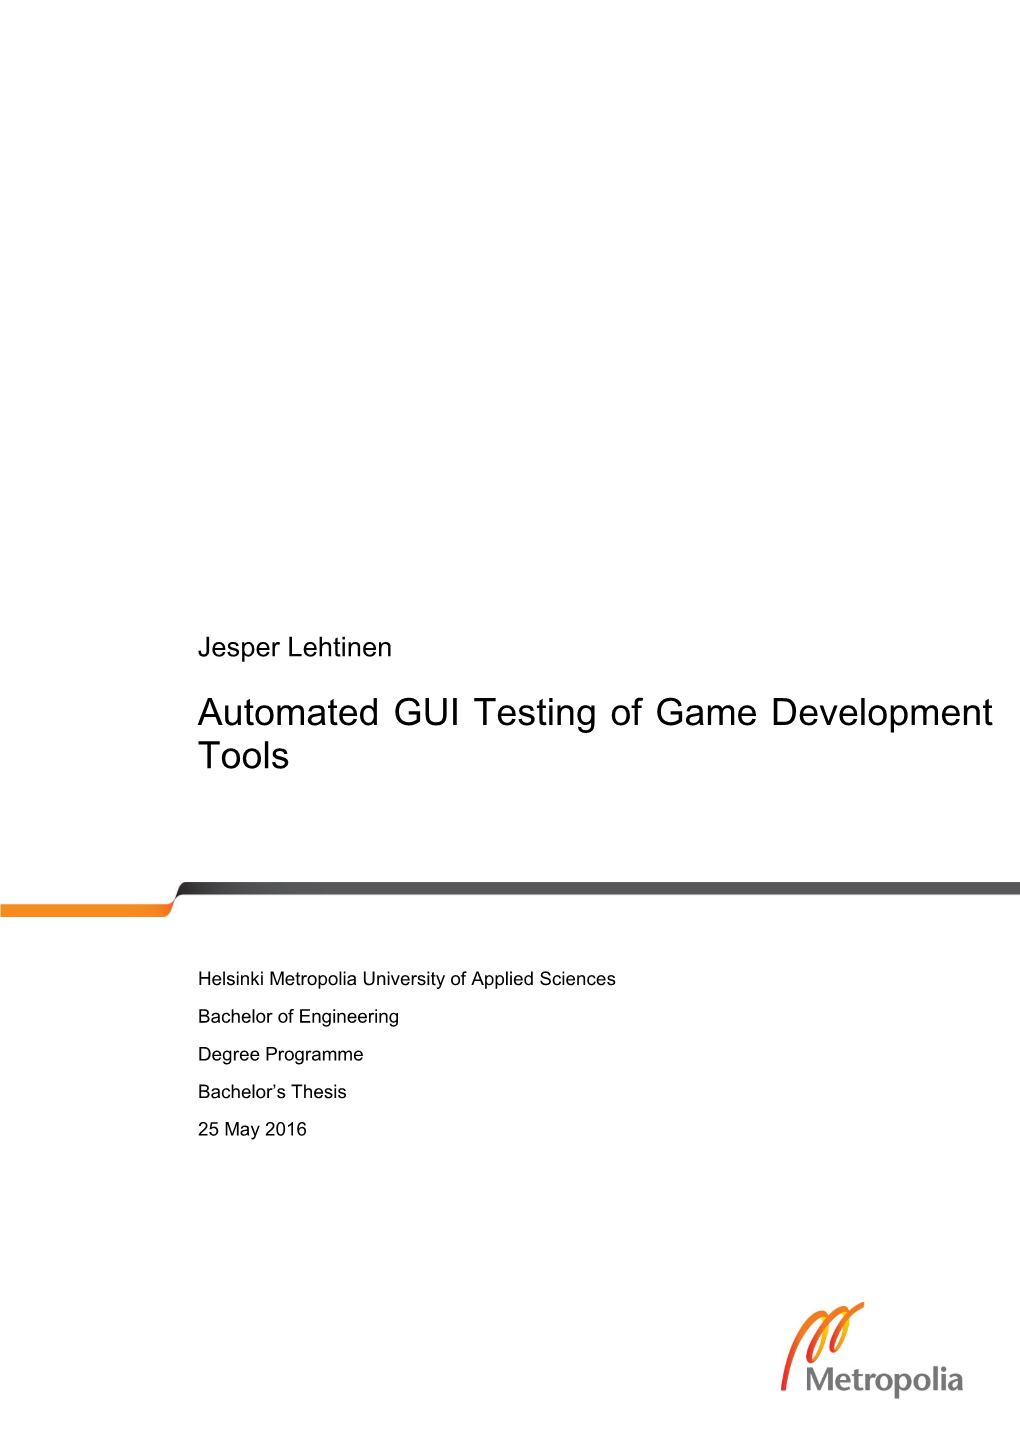 Automated GUI Testing of Game Development Tools